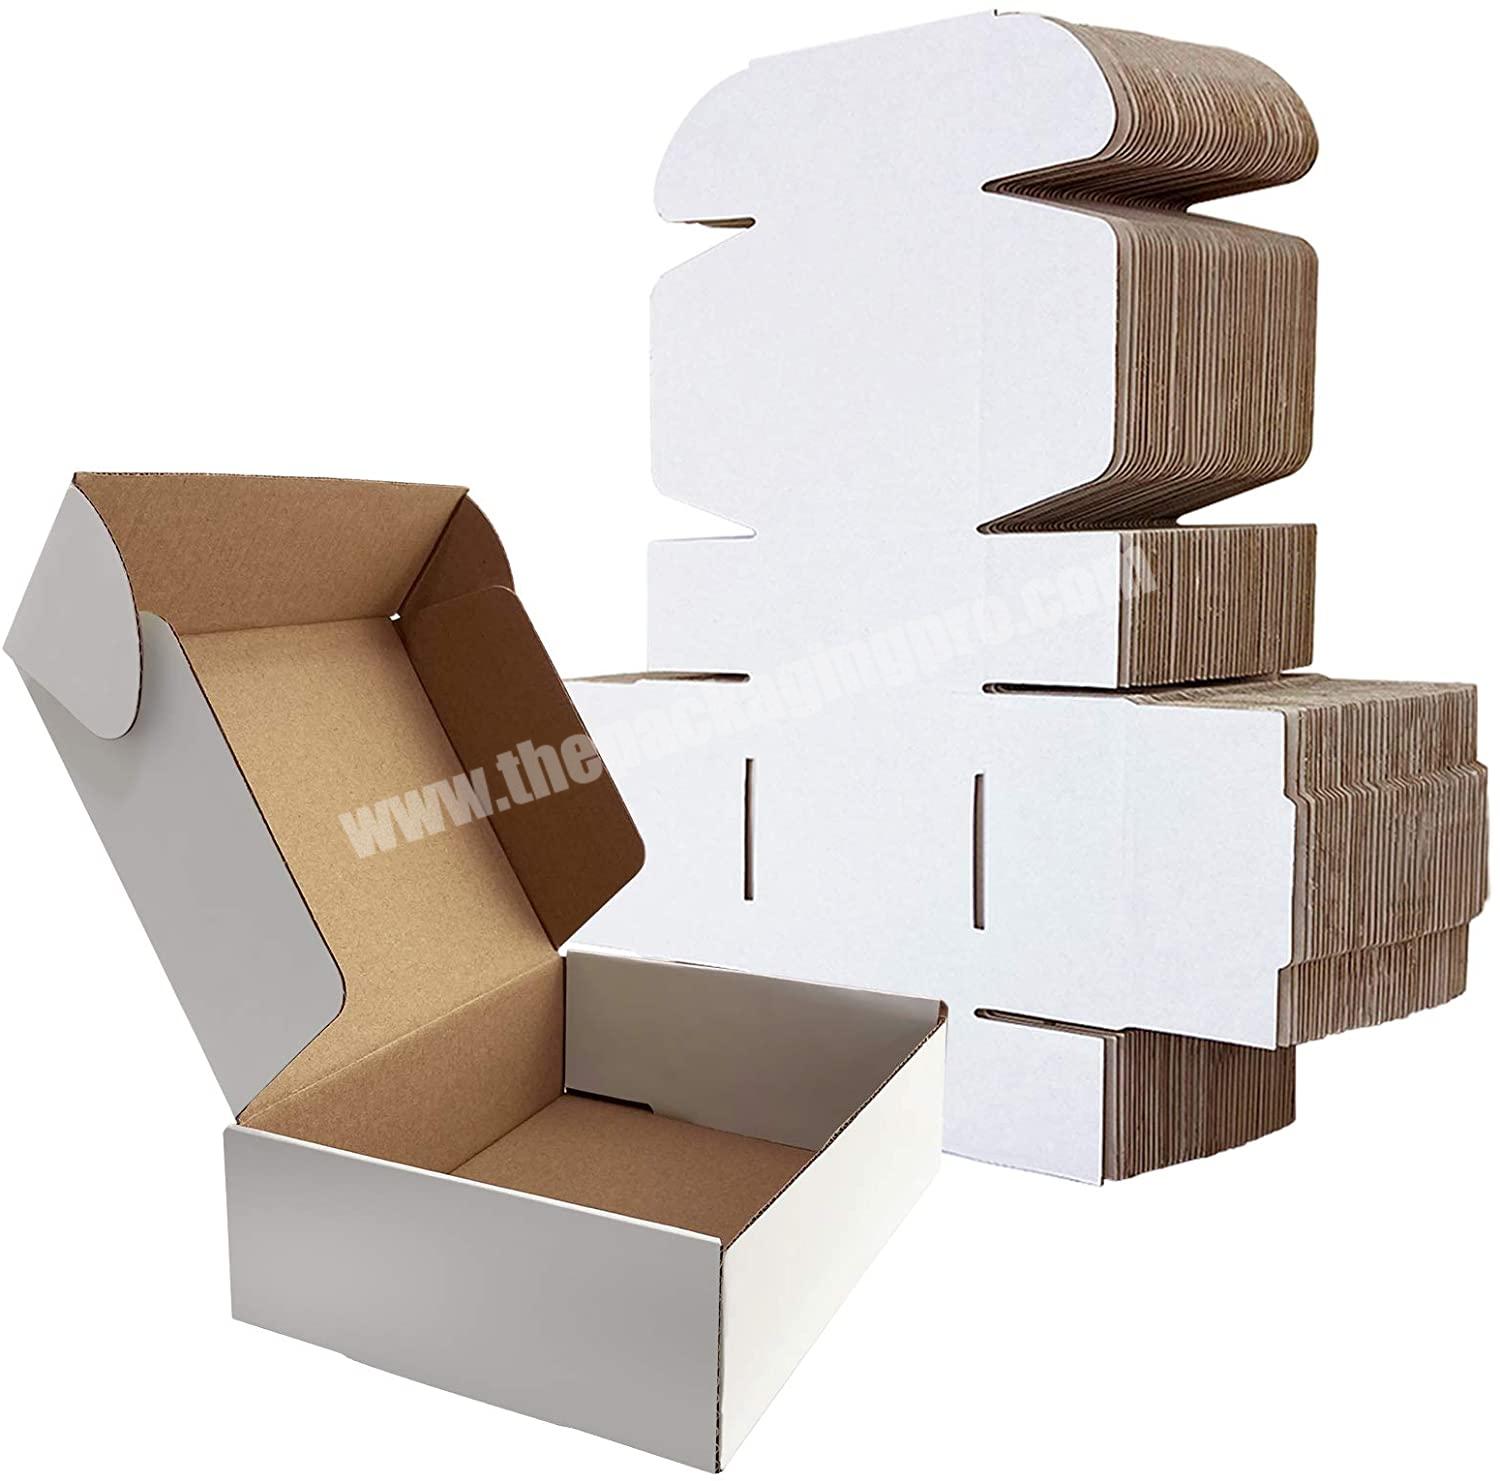 New Arrival Natural Storage Craft Gifts Giving Small Business Corrugated Paper Carton Packaging Craft Shipping Mailer Boxes